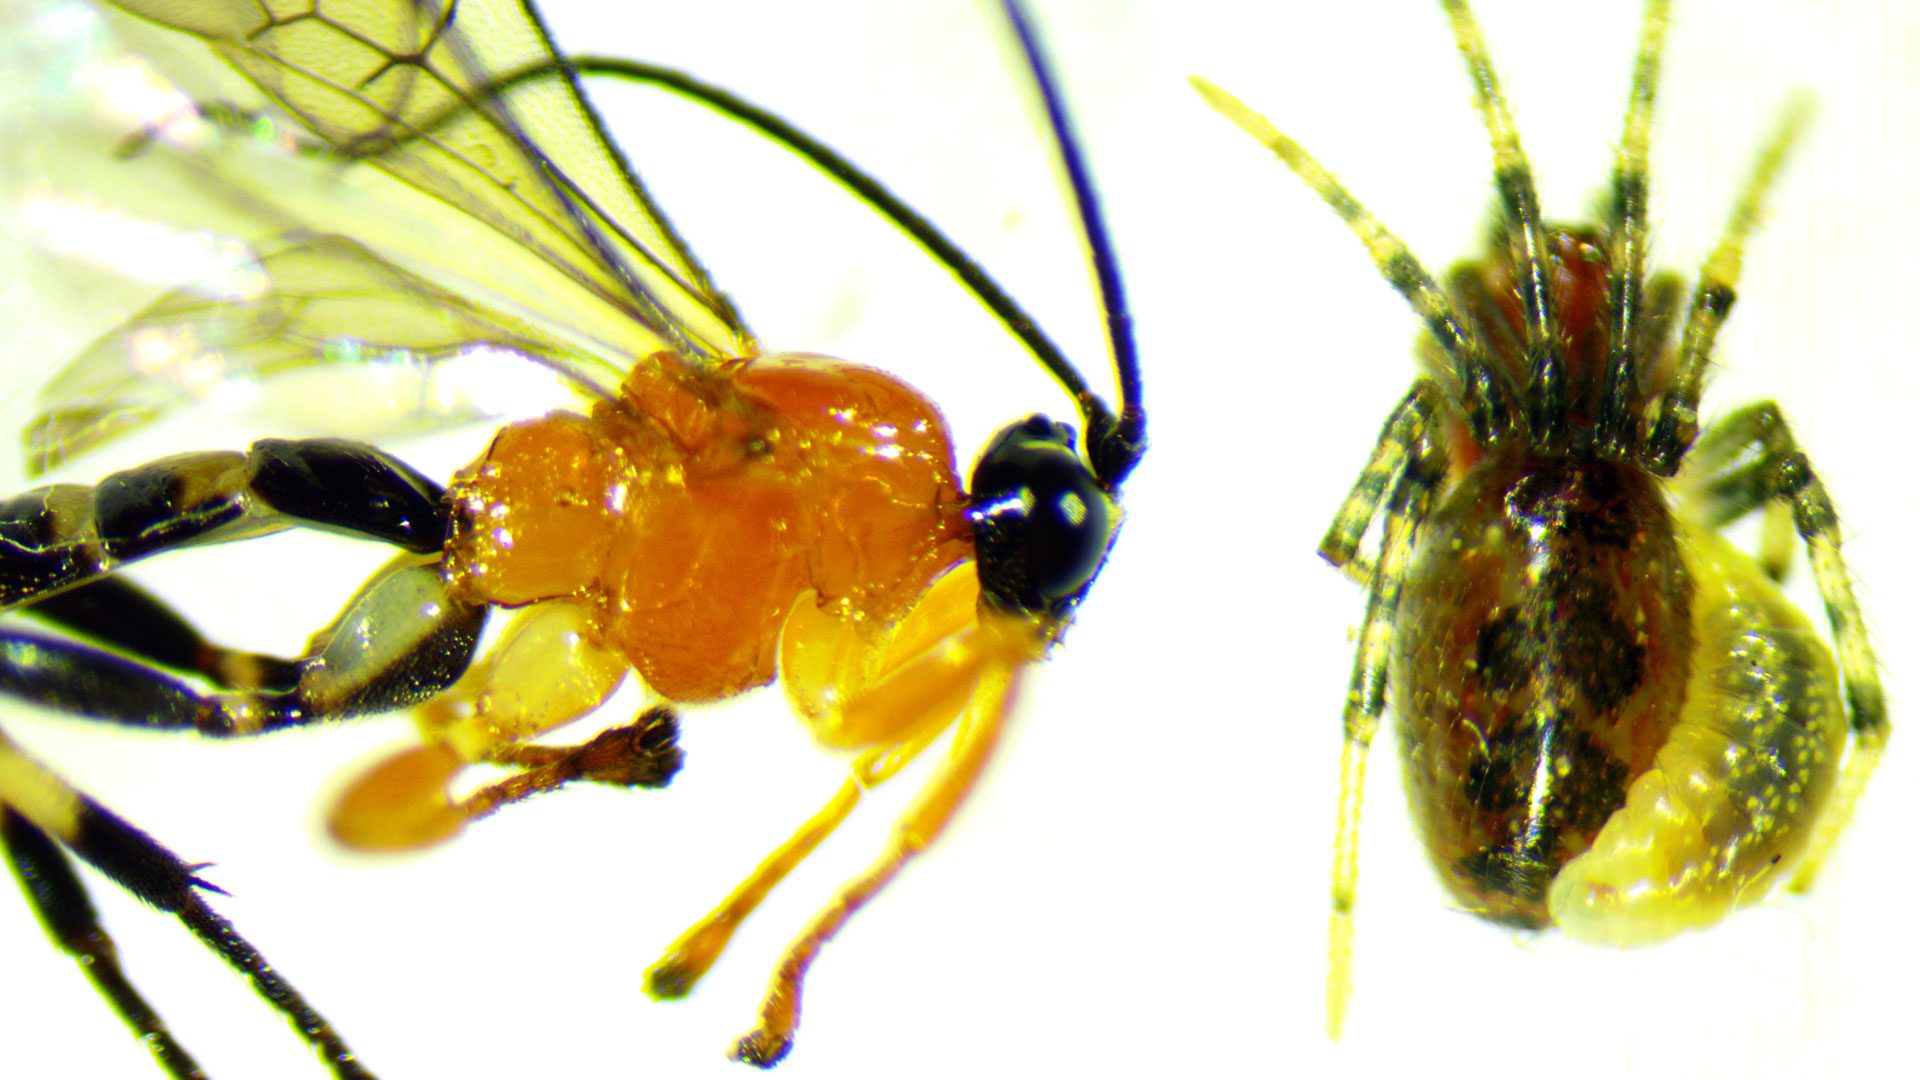 Adult stage of the parasitoid Zatypota species wasp (left); Larva of Zatypota wasp attached to the abdomen of an Anelosimus eximius spider. (Credit: University of British Columbia)